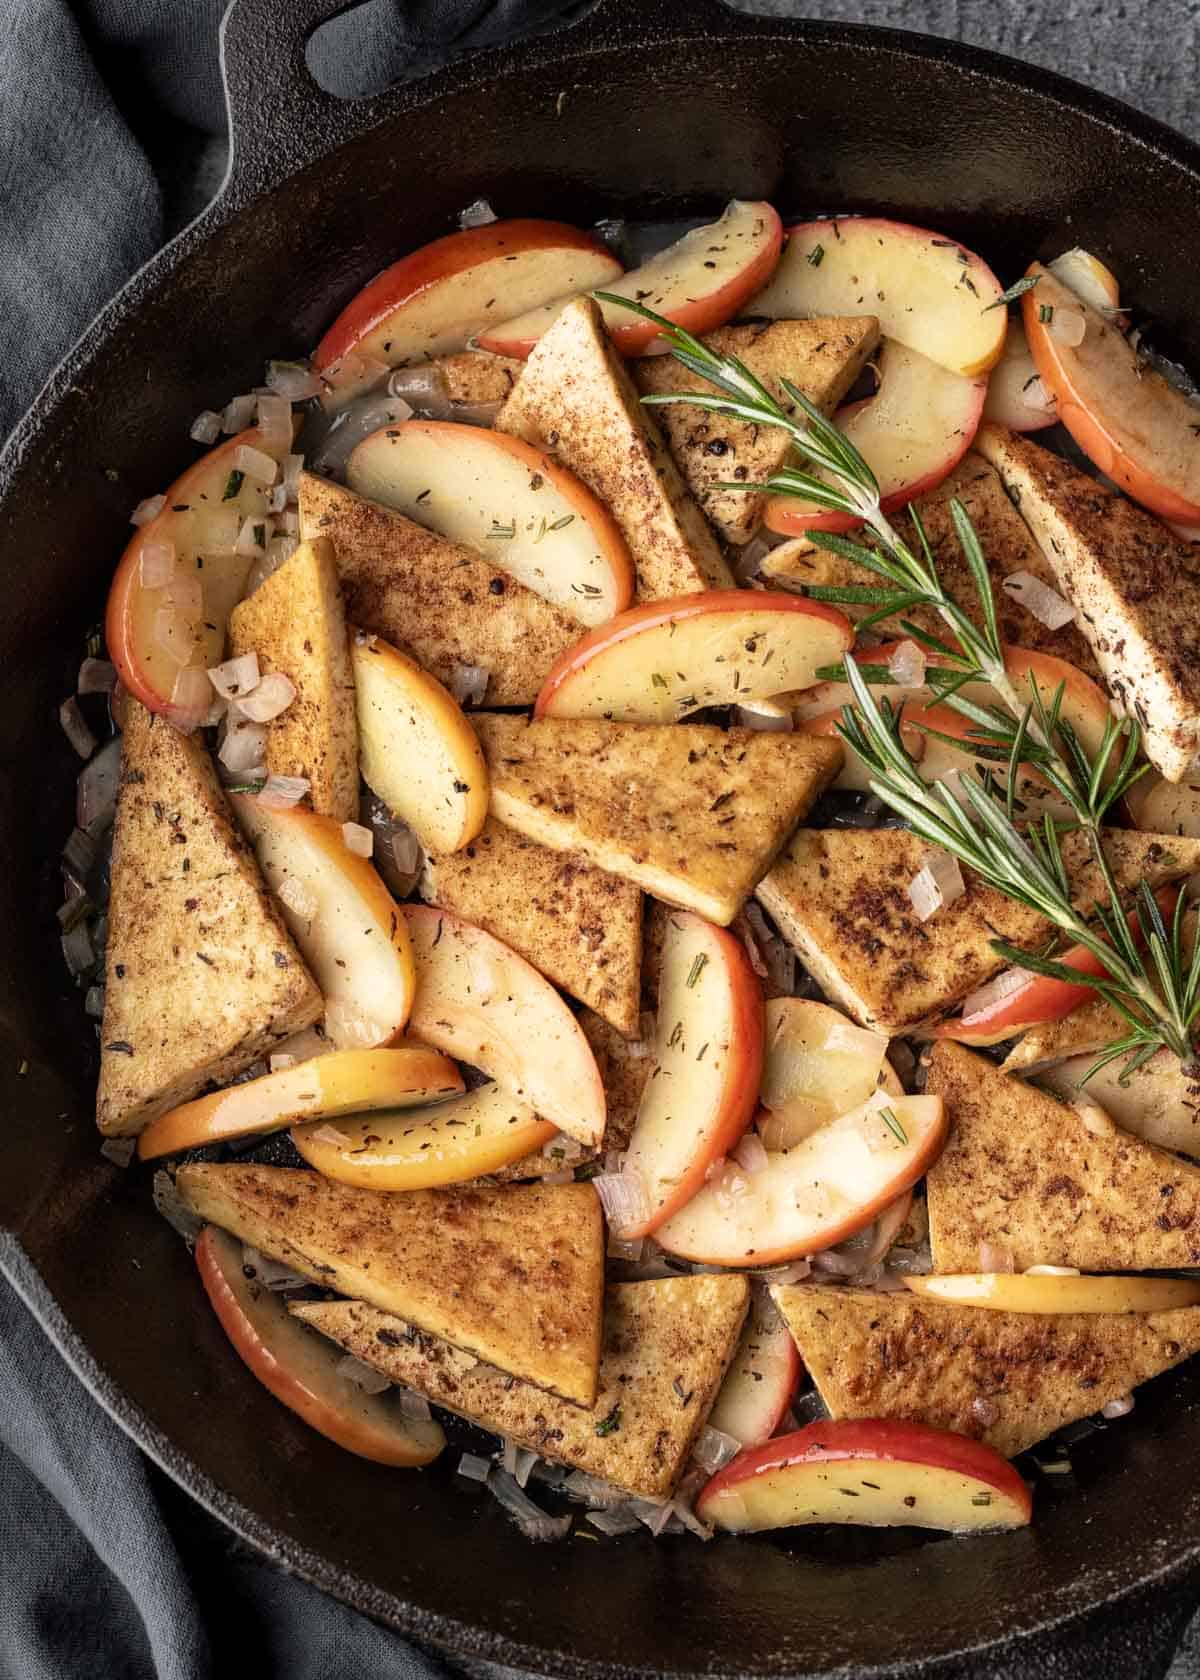 Apple cider tofu made with fresh apples, shallot, and herbs in a large cast iron skillet.